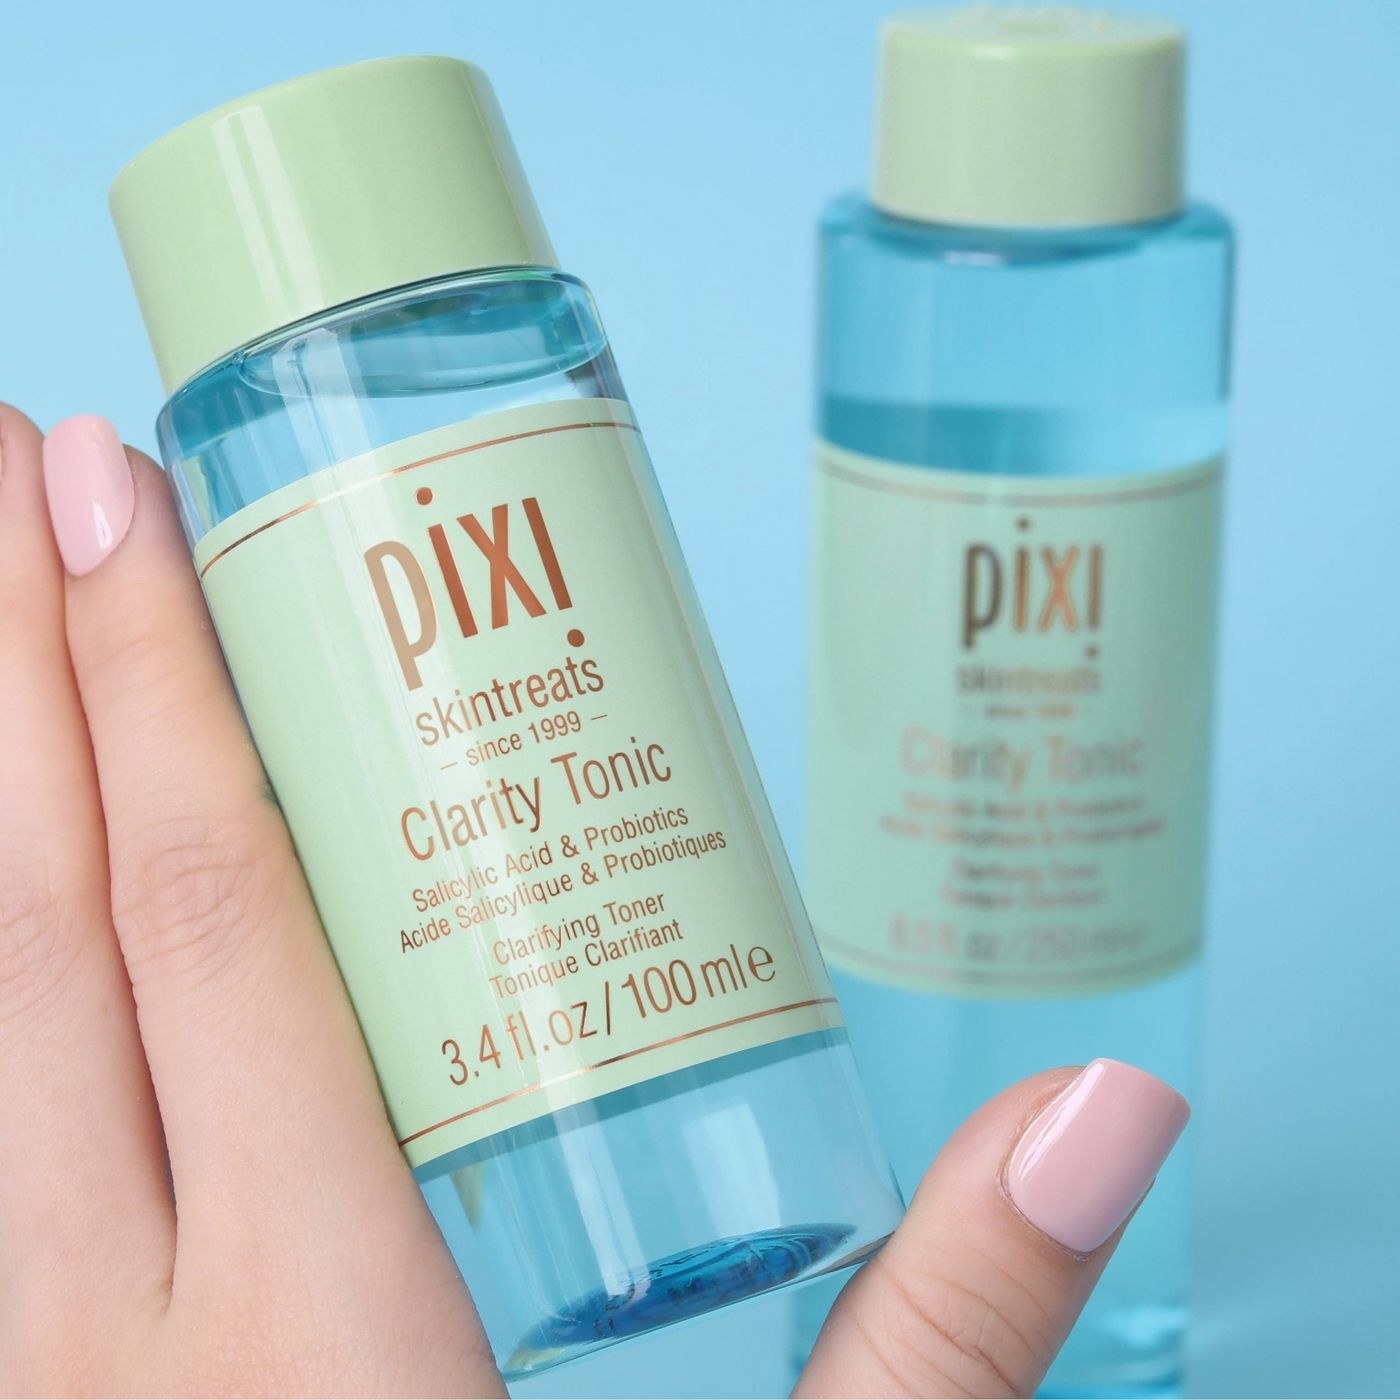 The Pixi by Petra clarity tonic